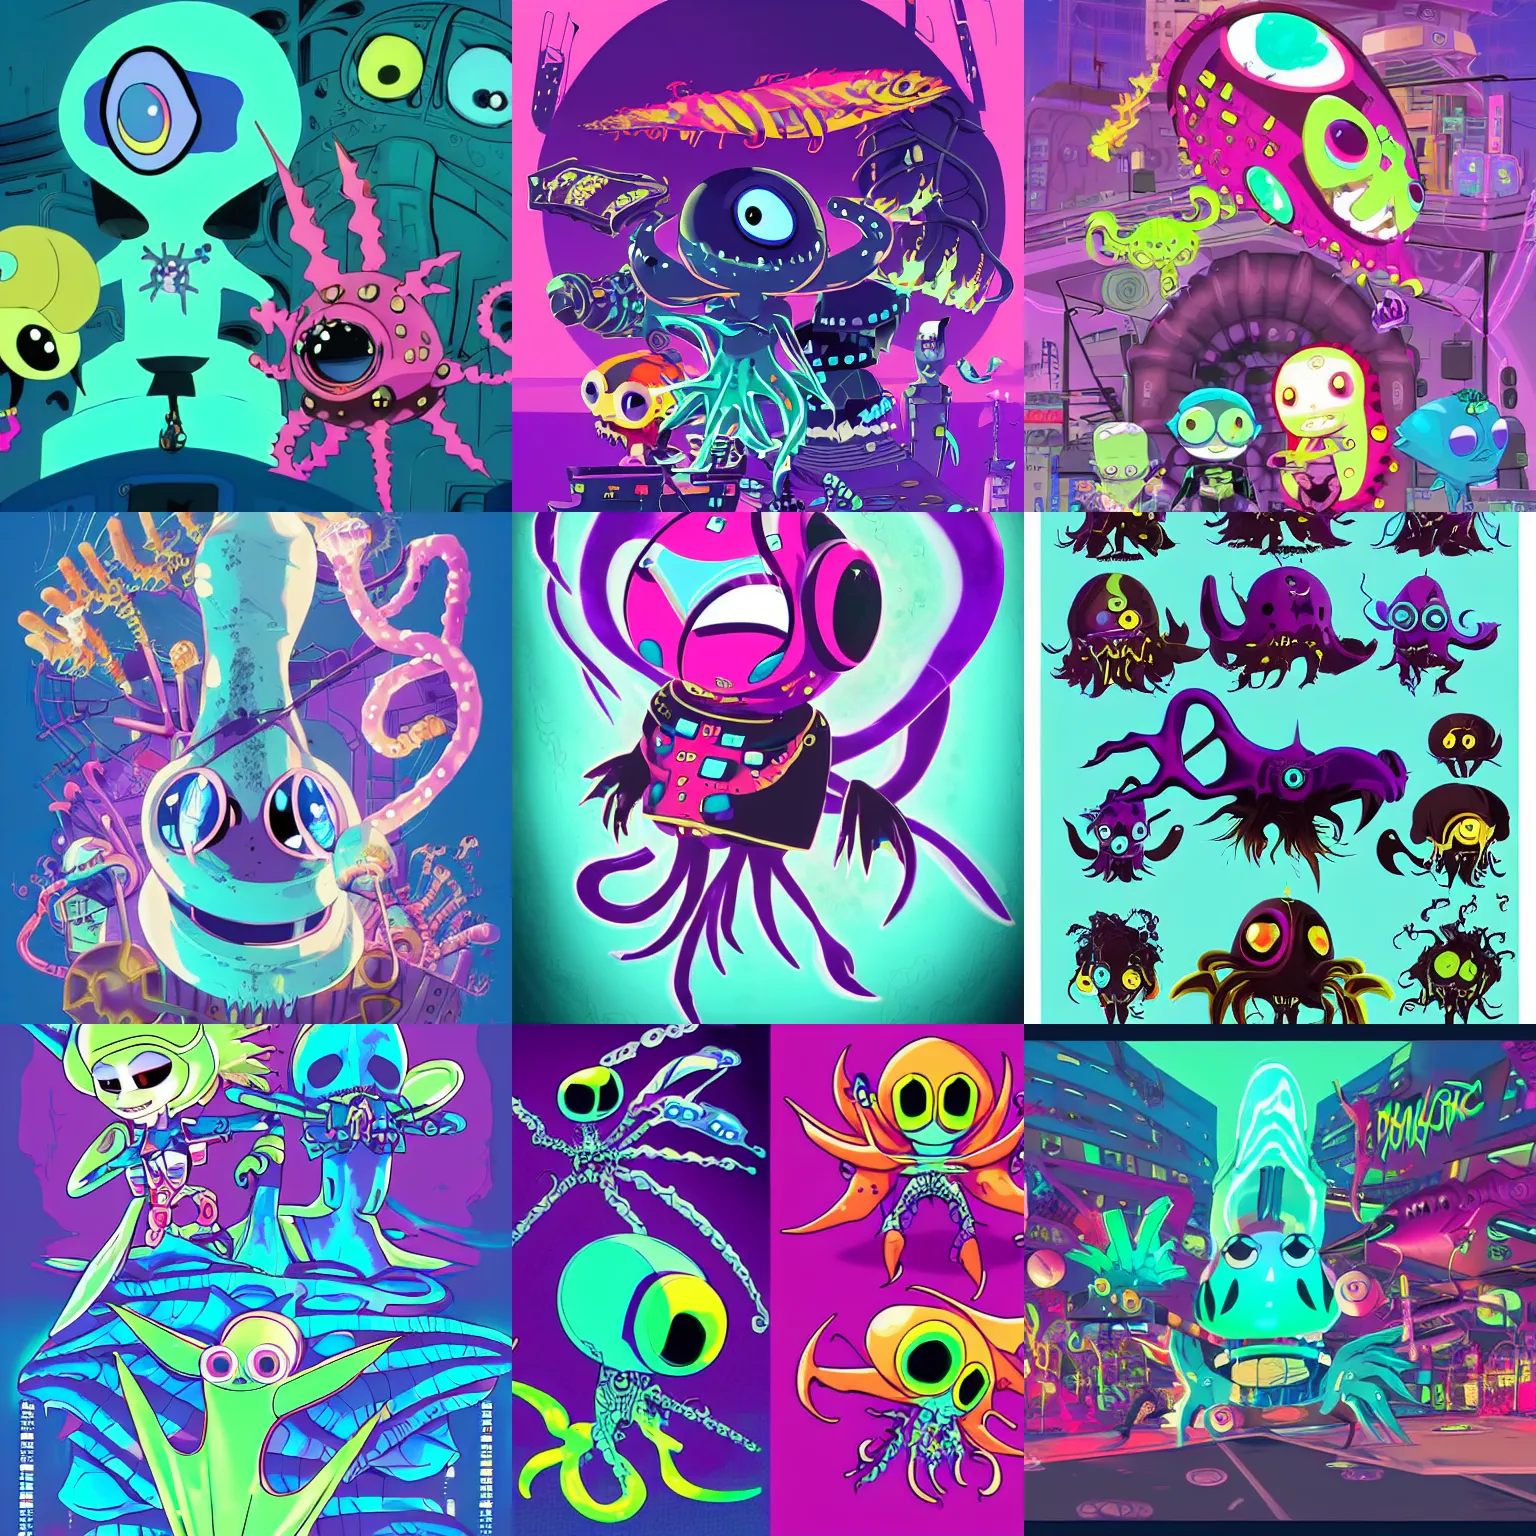 Prompt: psychic cyberpunk vaporwave punk rocker vampiric electrifying rockstar vampire squid, angler fish, gulper eel, and sea urchins conceptual character designs of various shapes and sizes by genndy tartakovsky and splatoon by nintendo and the psychonauts franchise by doublefine tim shafer artists for the new hotel transylvania film